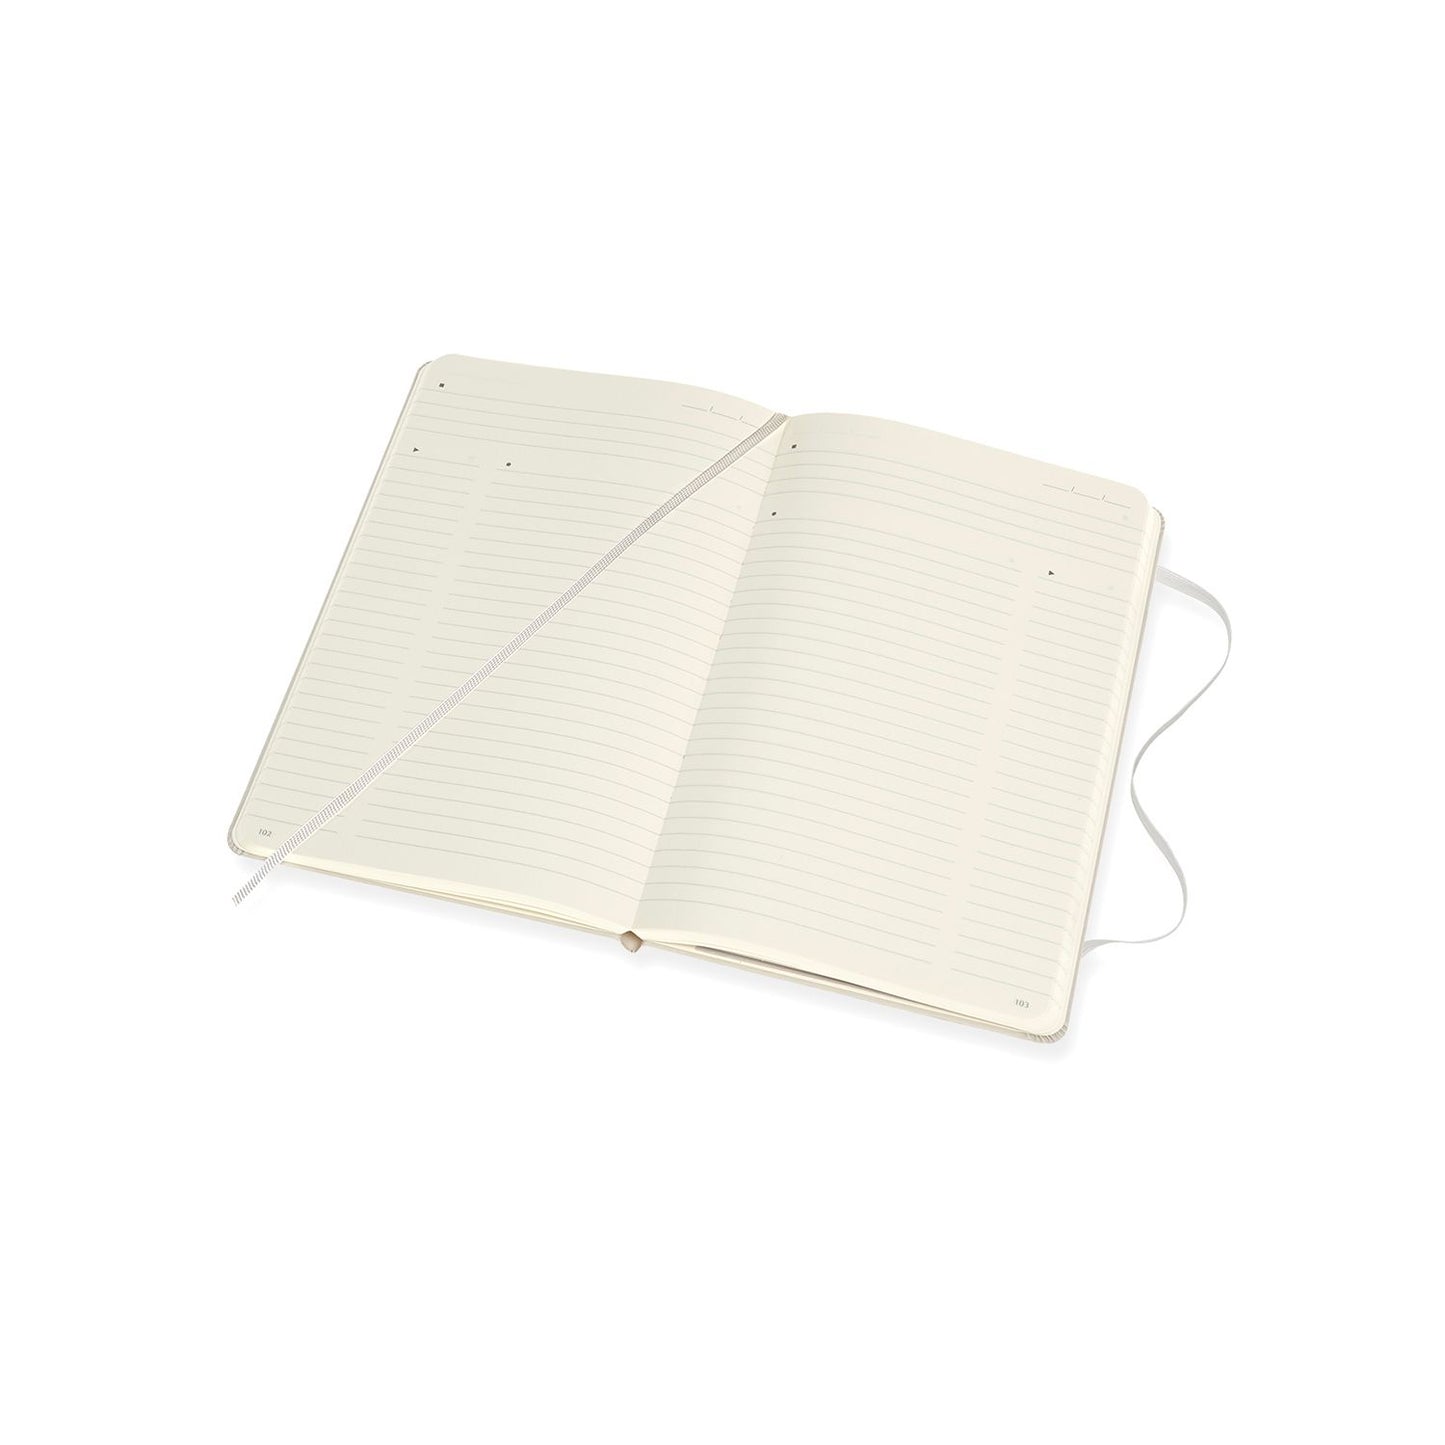 Pro Notebook - Hard Cover